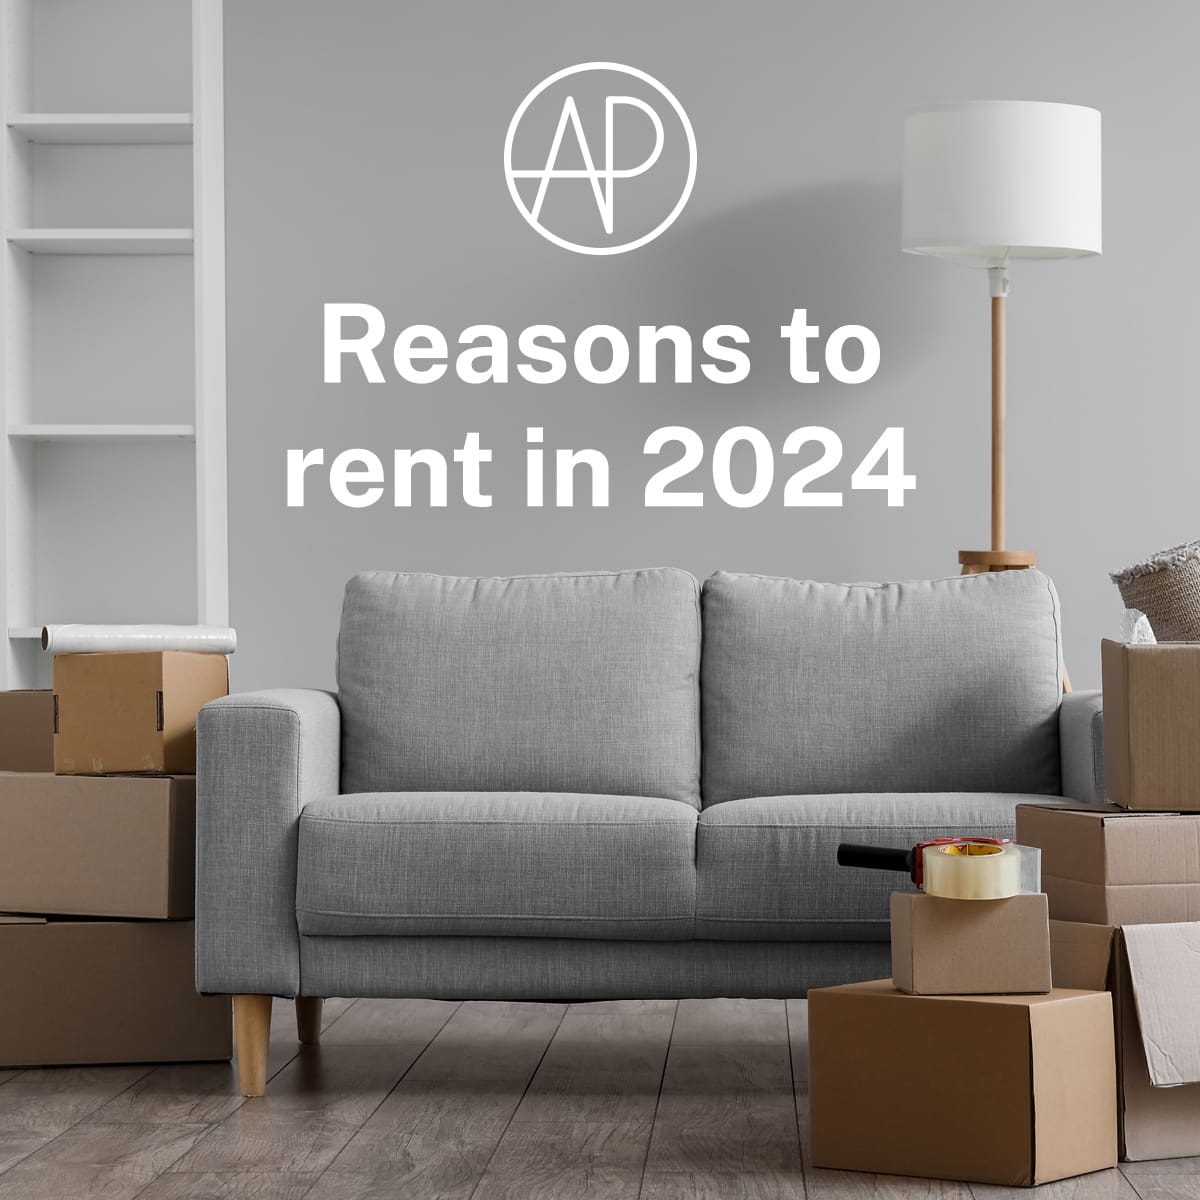 Benefits of renting in 2024